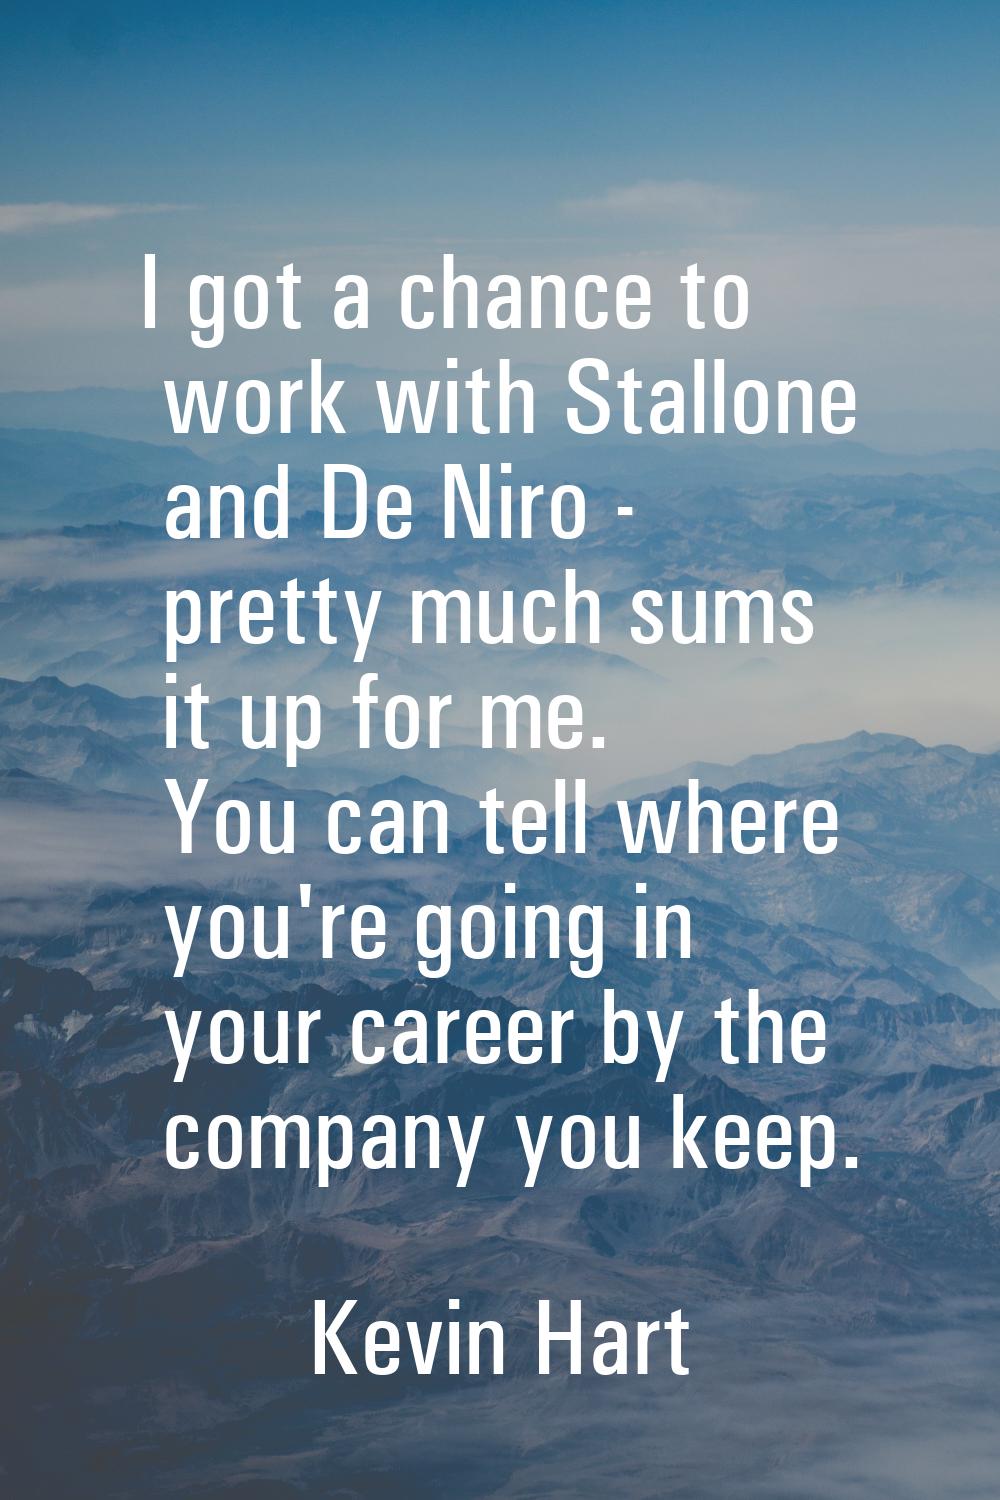 I got a chance to work with Stallone and De Niro - pretty much sums it up for me. You can tell wher